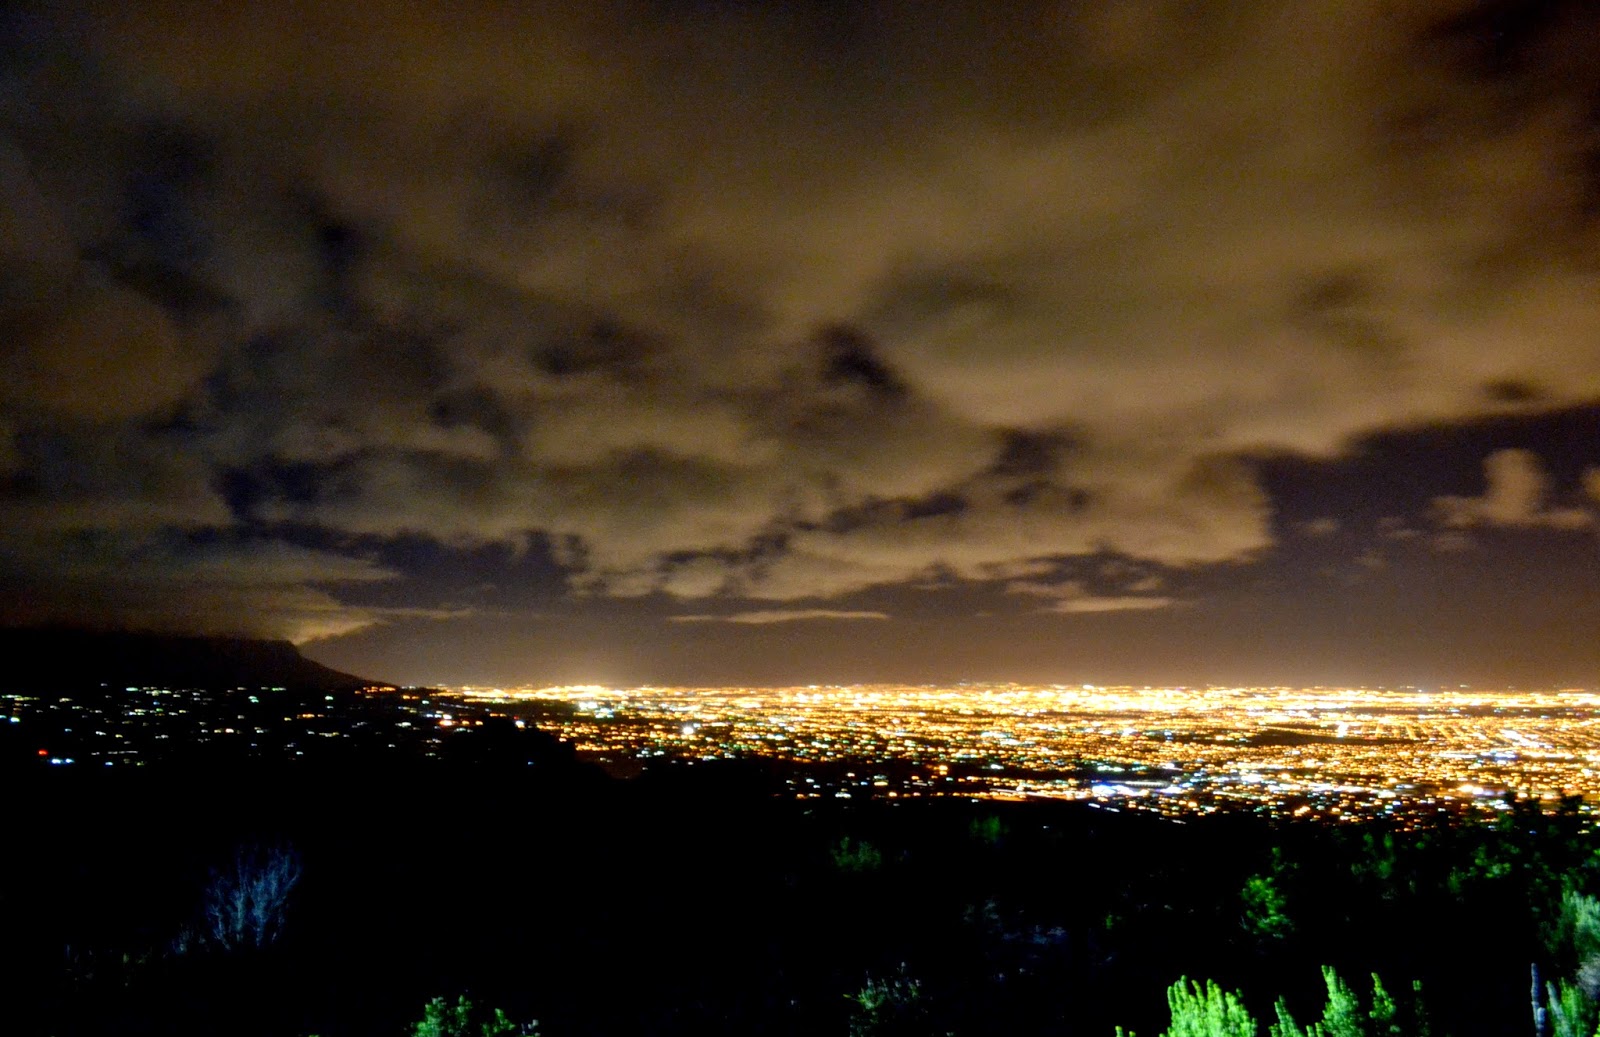 View from Ou Kaapse Weg at night